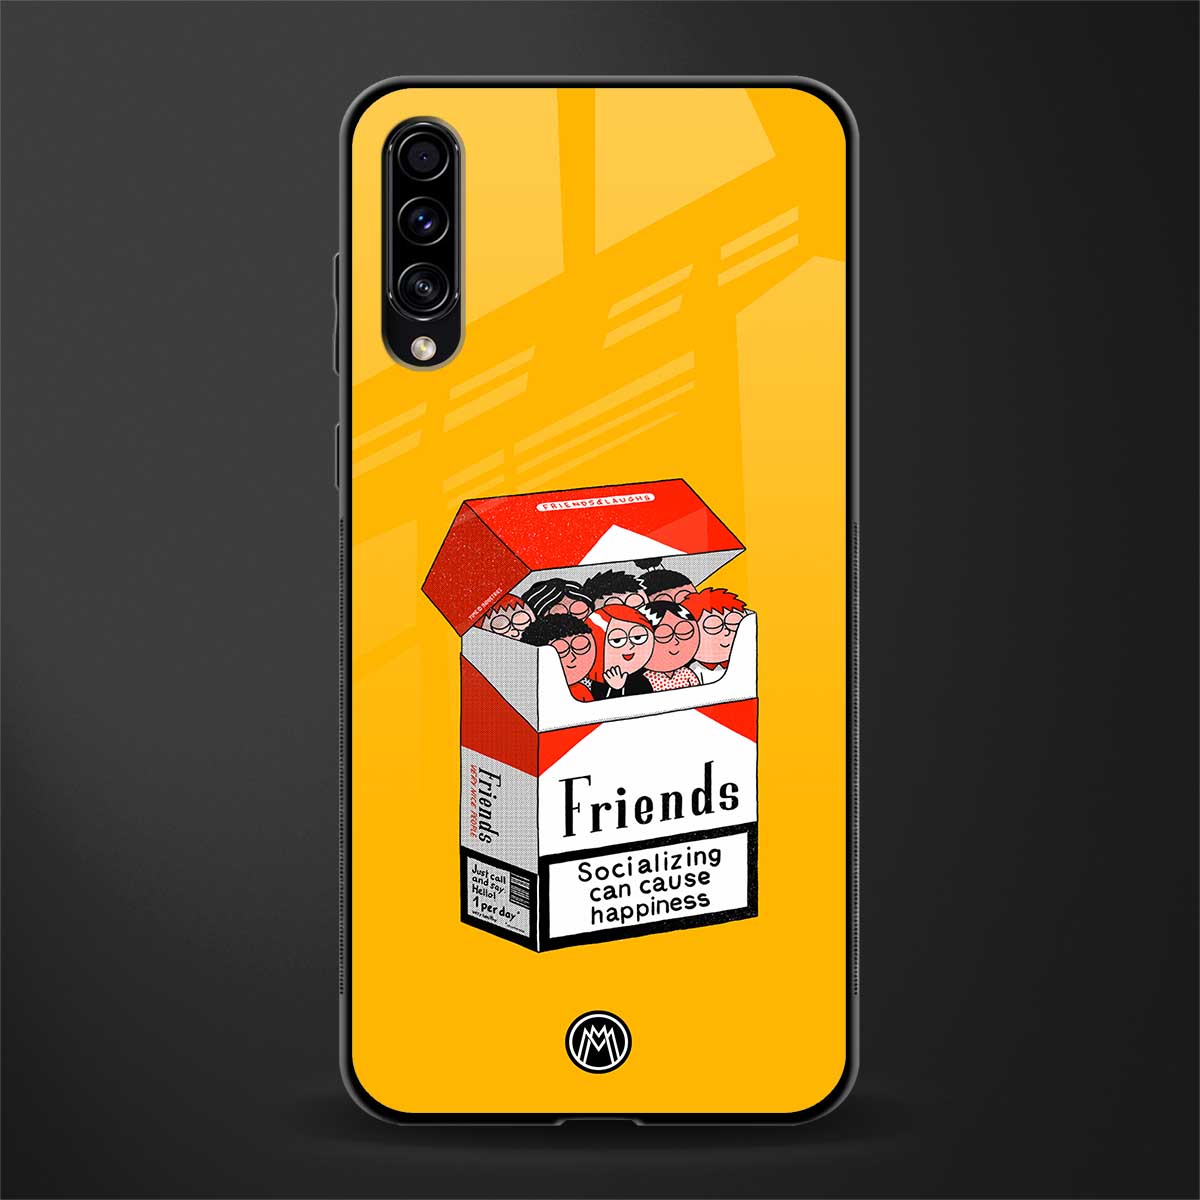 socializing can cause happiness glass case for samsung galaxy a70s image